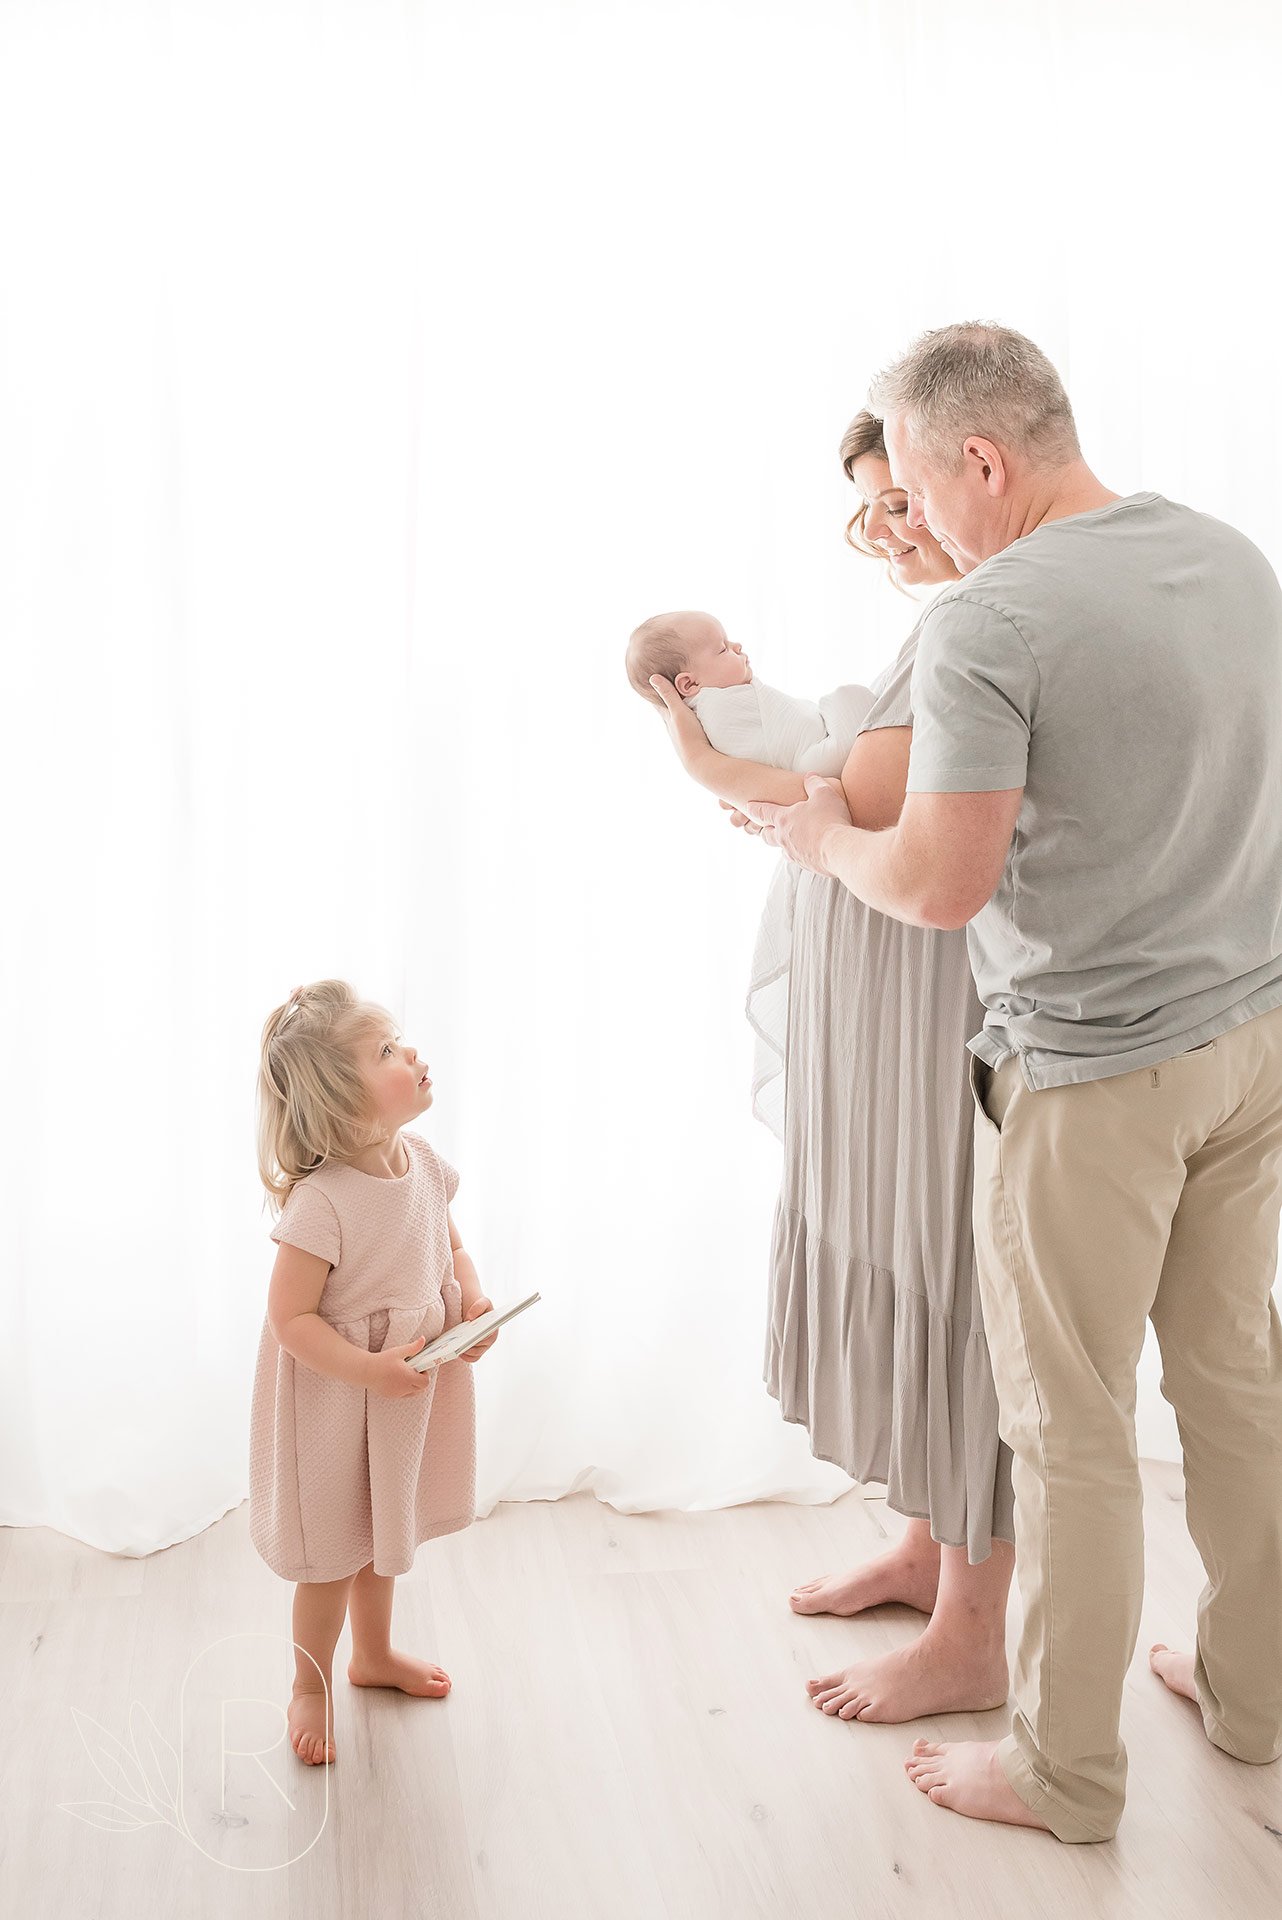 capturing-family-story-moments-with-baby-newborn-photography-Reflections-niagara-ontario.jpeg